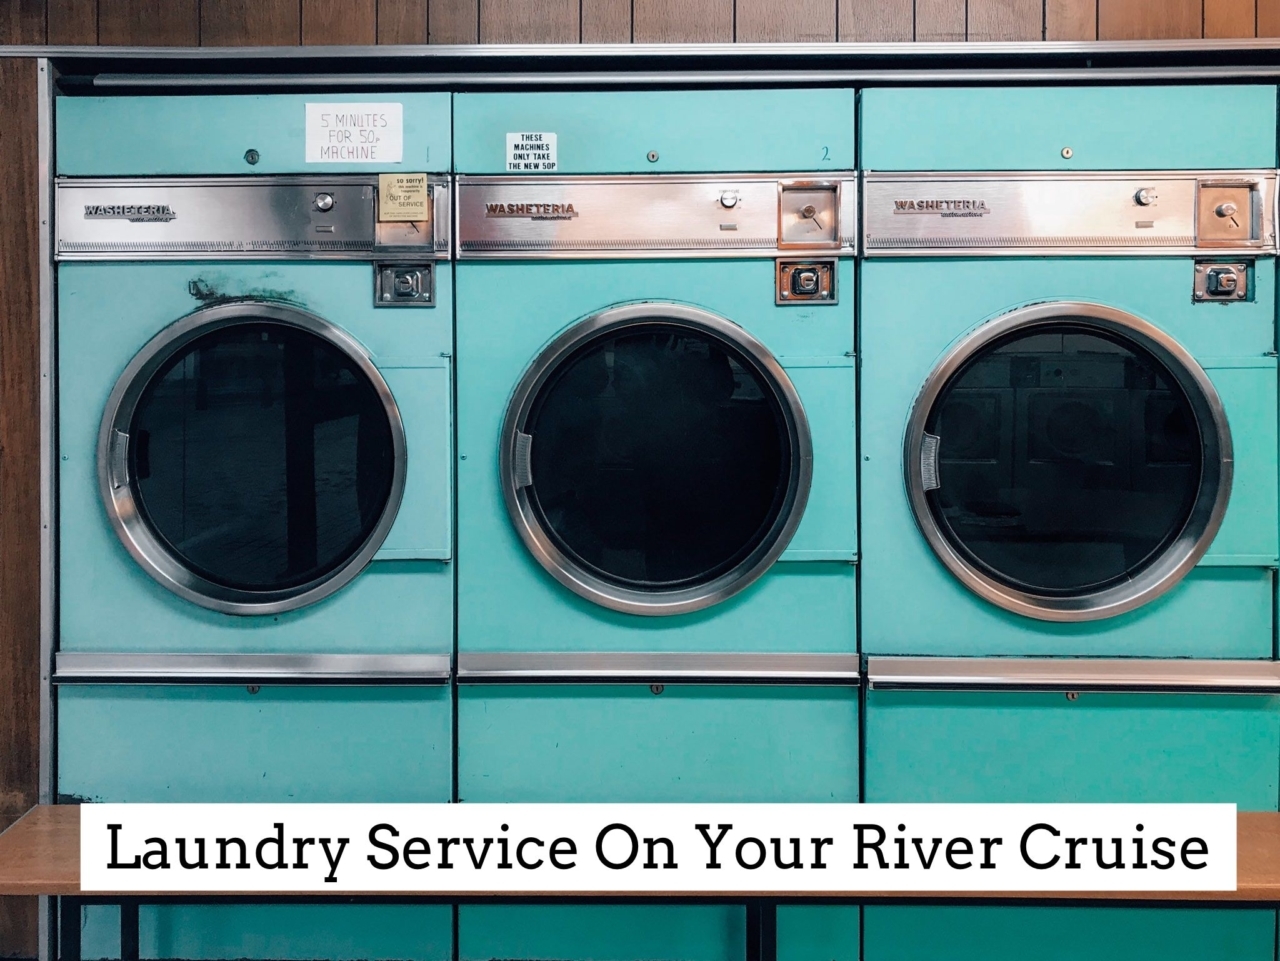 Are There Laundry Facilities on Viking River Cruises?